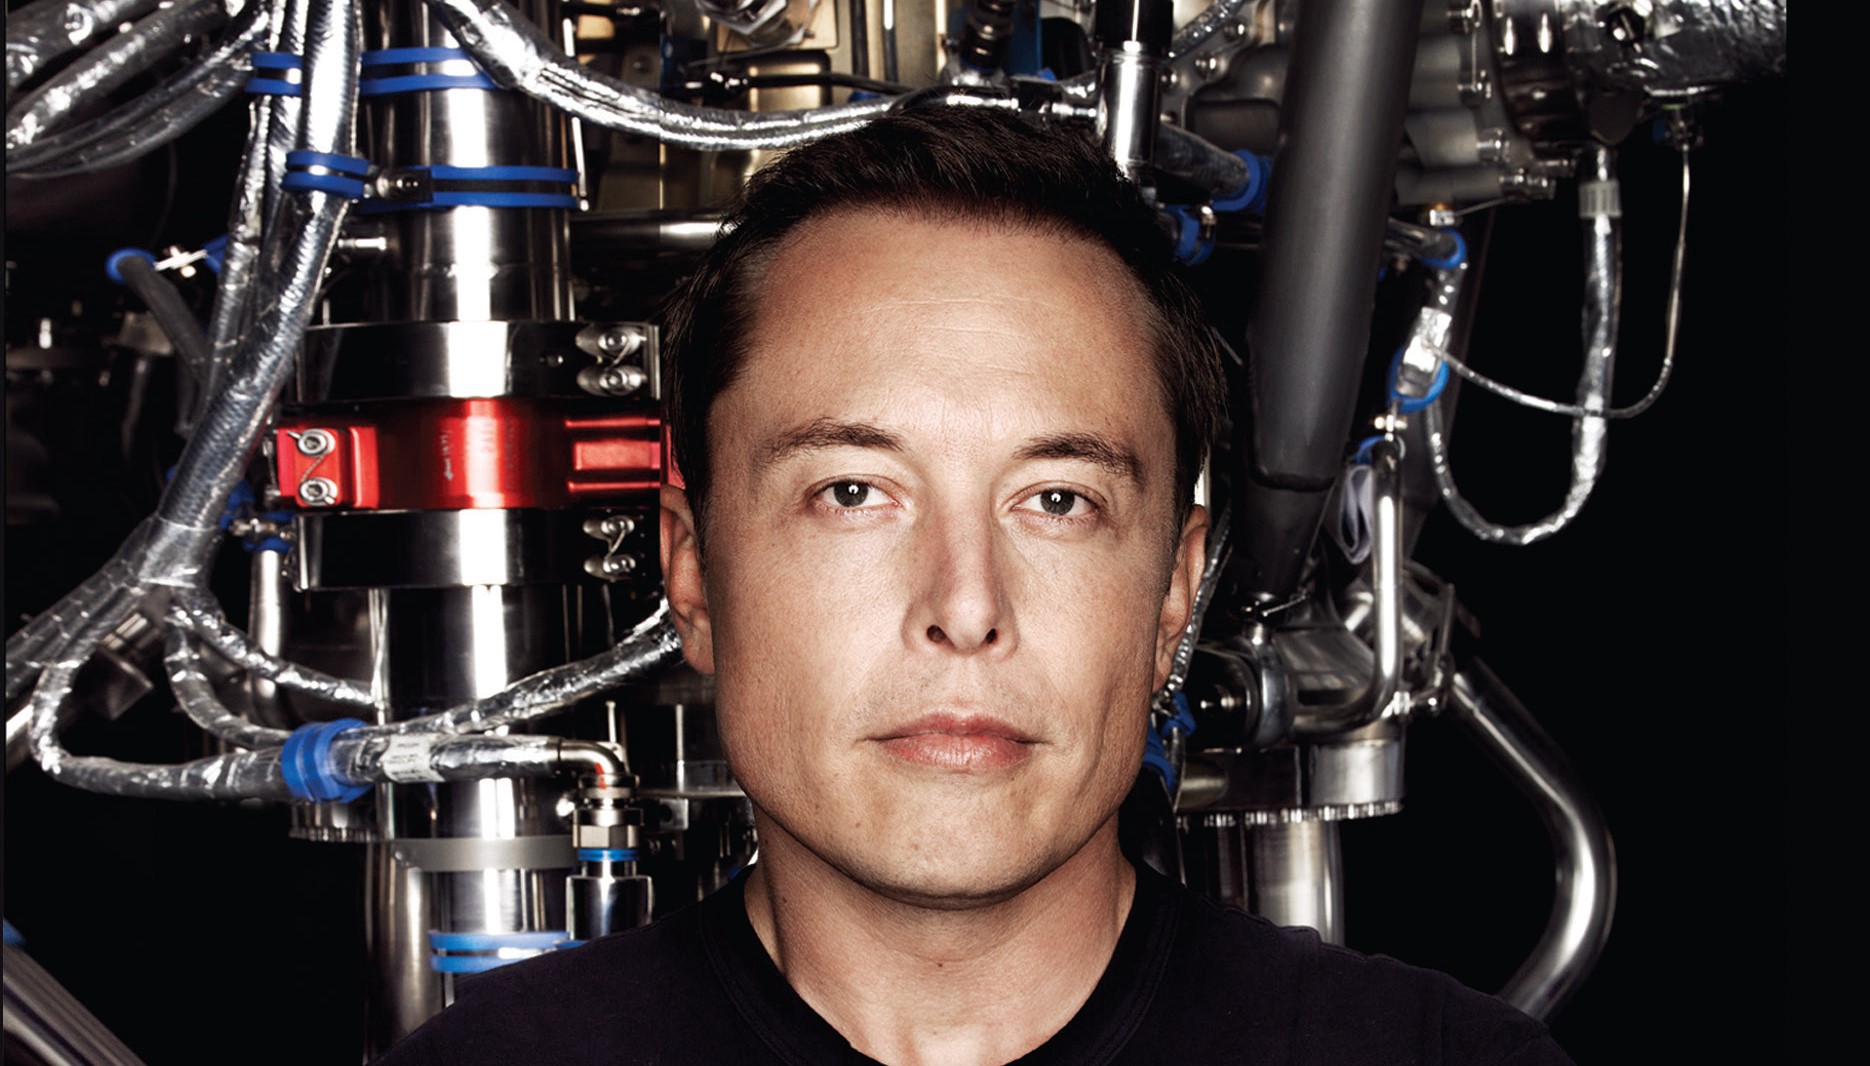 Elon Musk Tesla, SpaceX, and the Quest for a Fantastic Future - Biography about Elon Musk